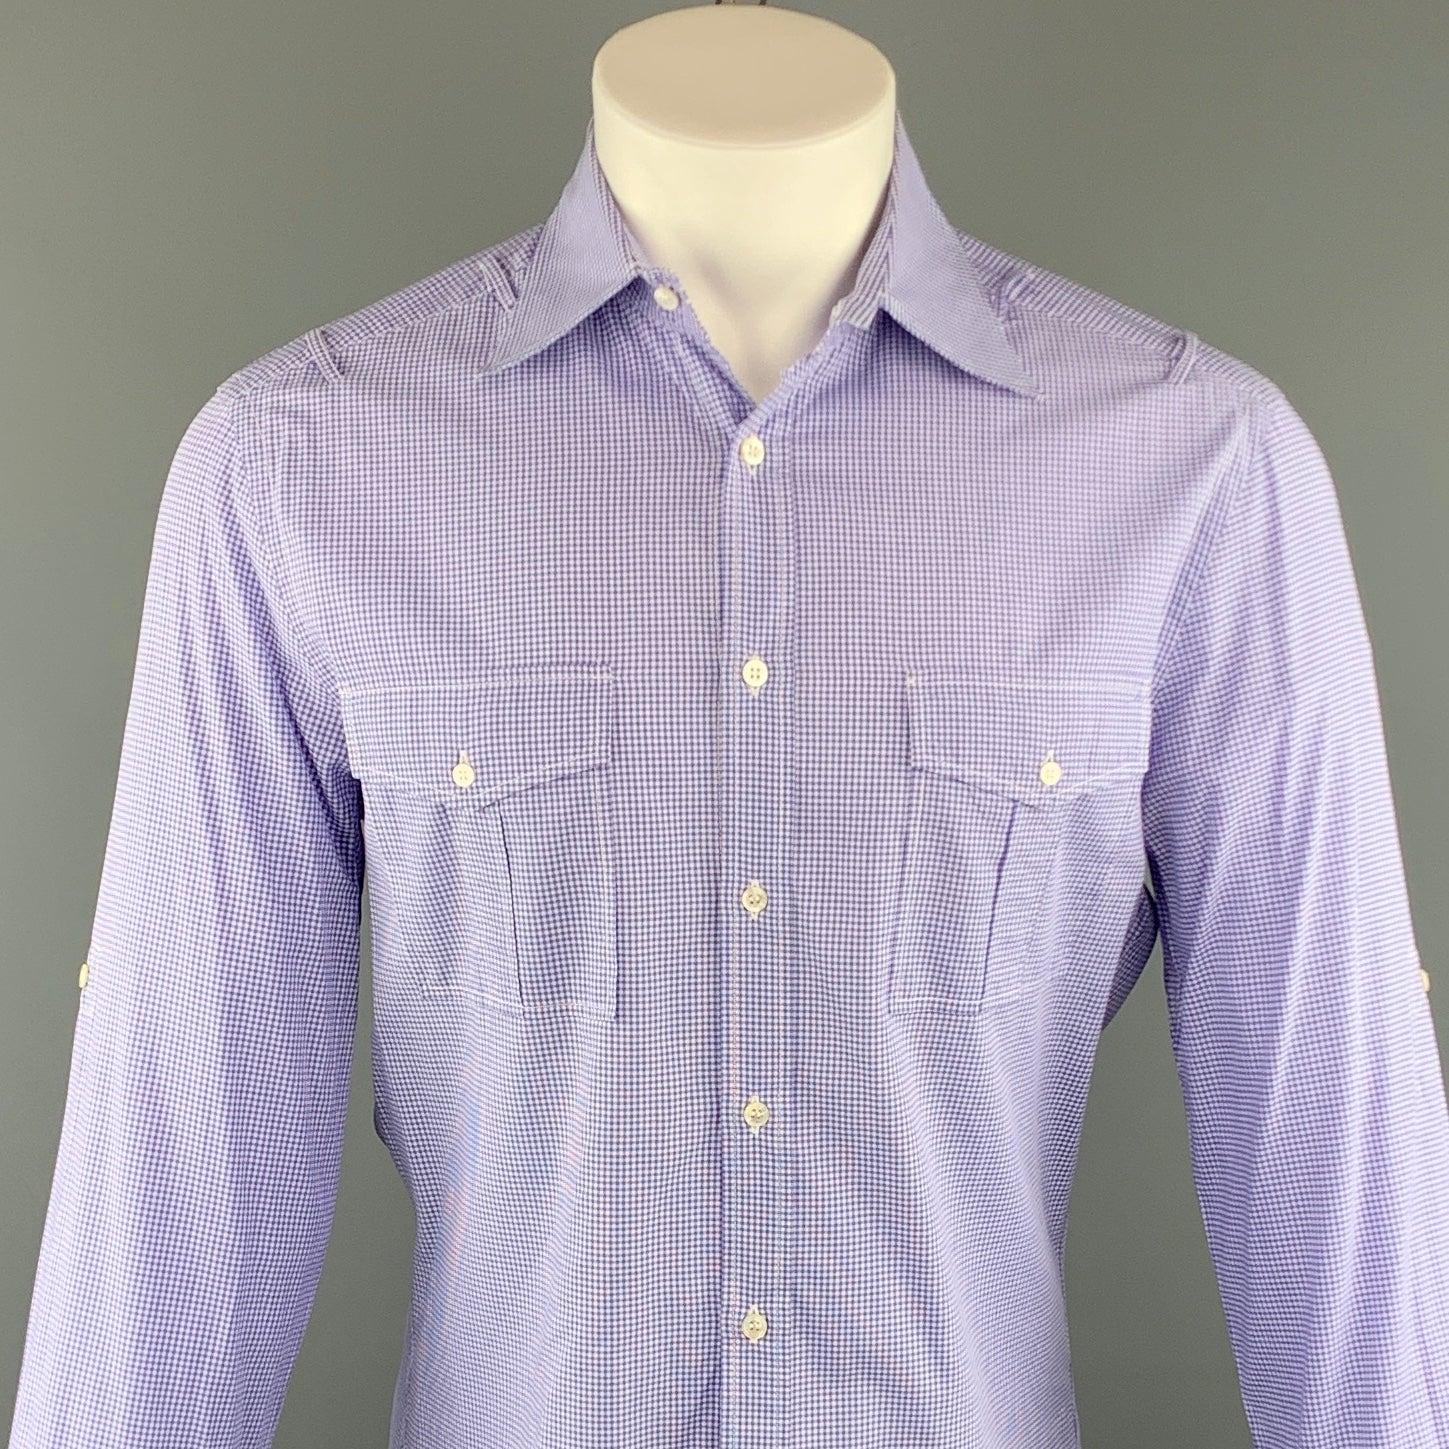 MICHAEL BASTIAN long sleeve shirt comes in a purple checkered cotton featuring a button up style, shoulder loop details, and front patch pockets. Made in Italy.
Excellent Pre-Owned Condition.
 

Marked:   40	
 

Measurements: 
  
l	Shoulder: 17.5